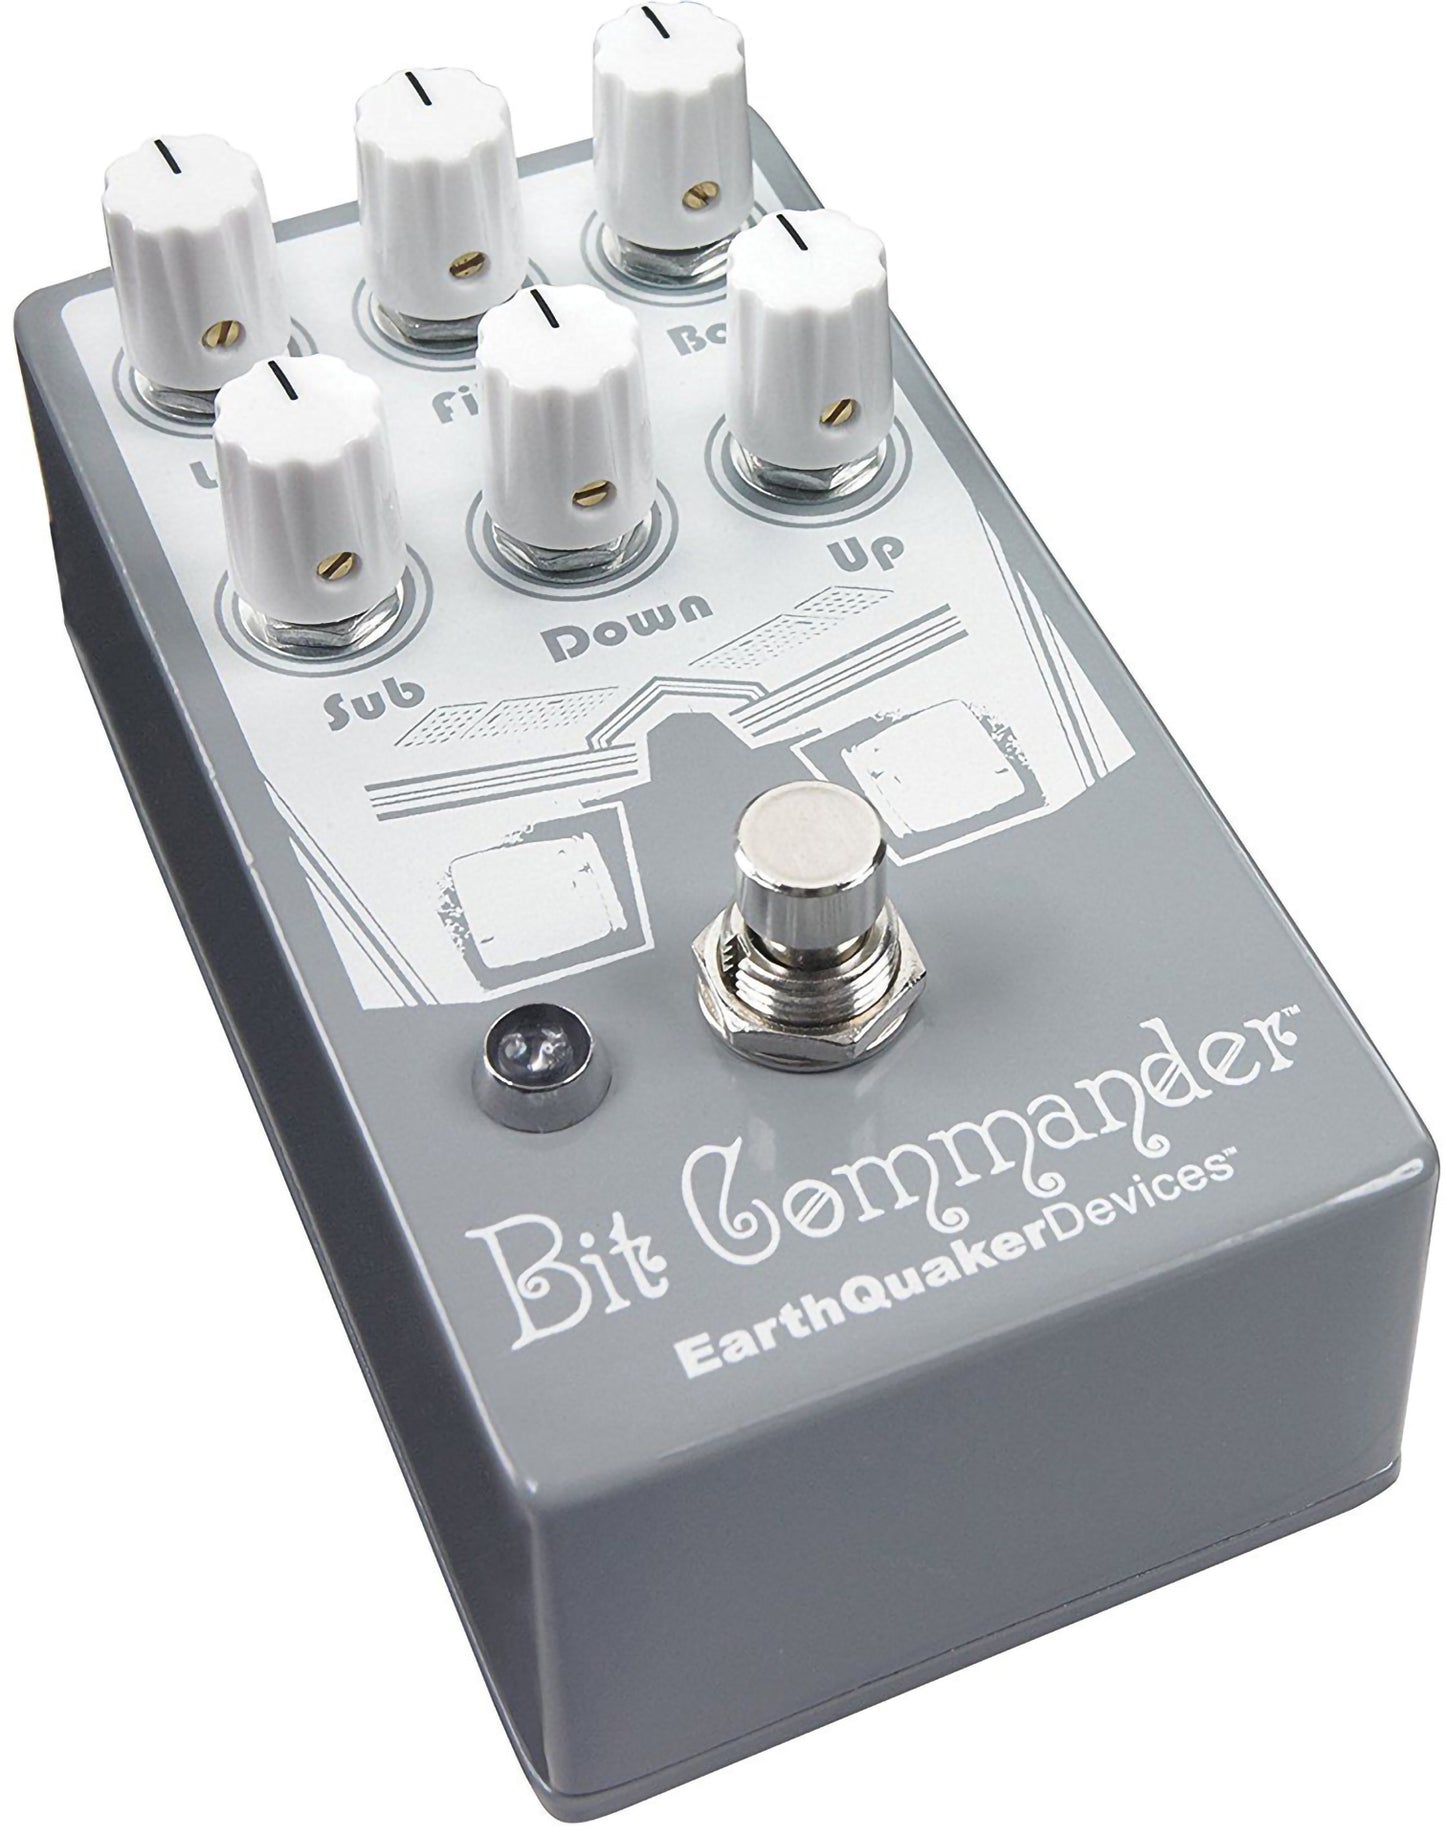 EarthQuaker Devices Bit Commander V2 Octave Synth Pedal